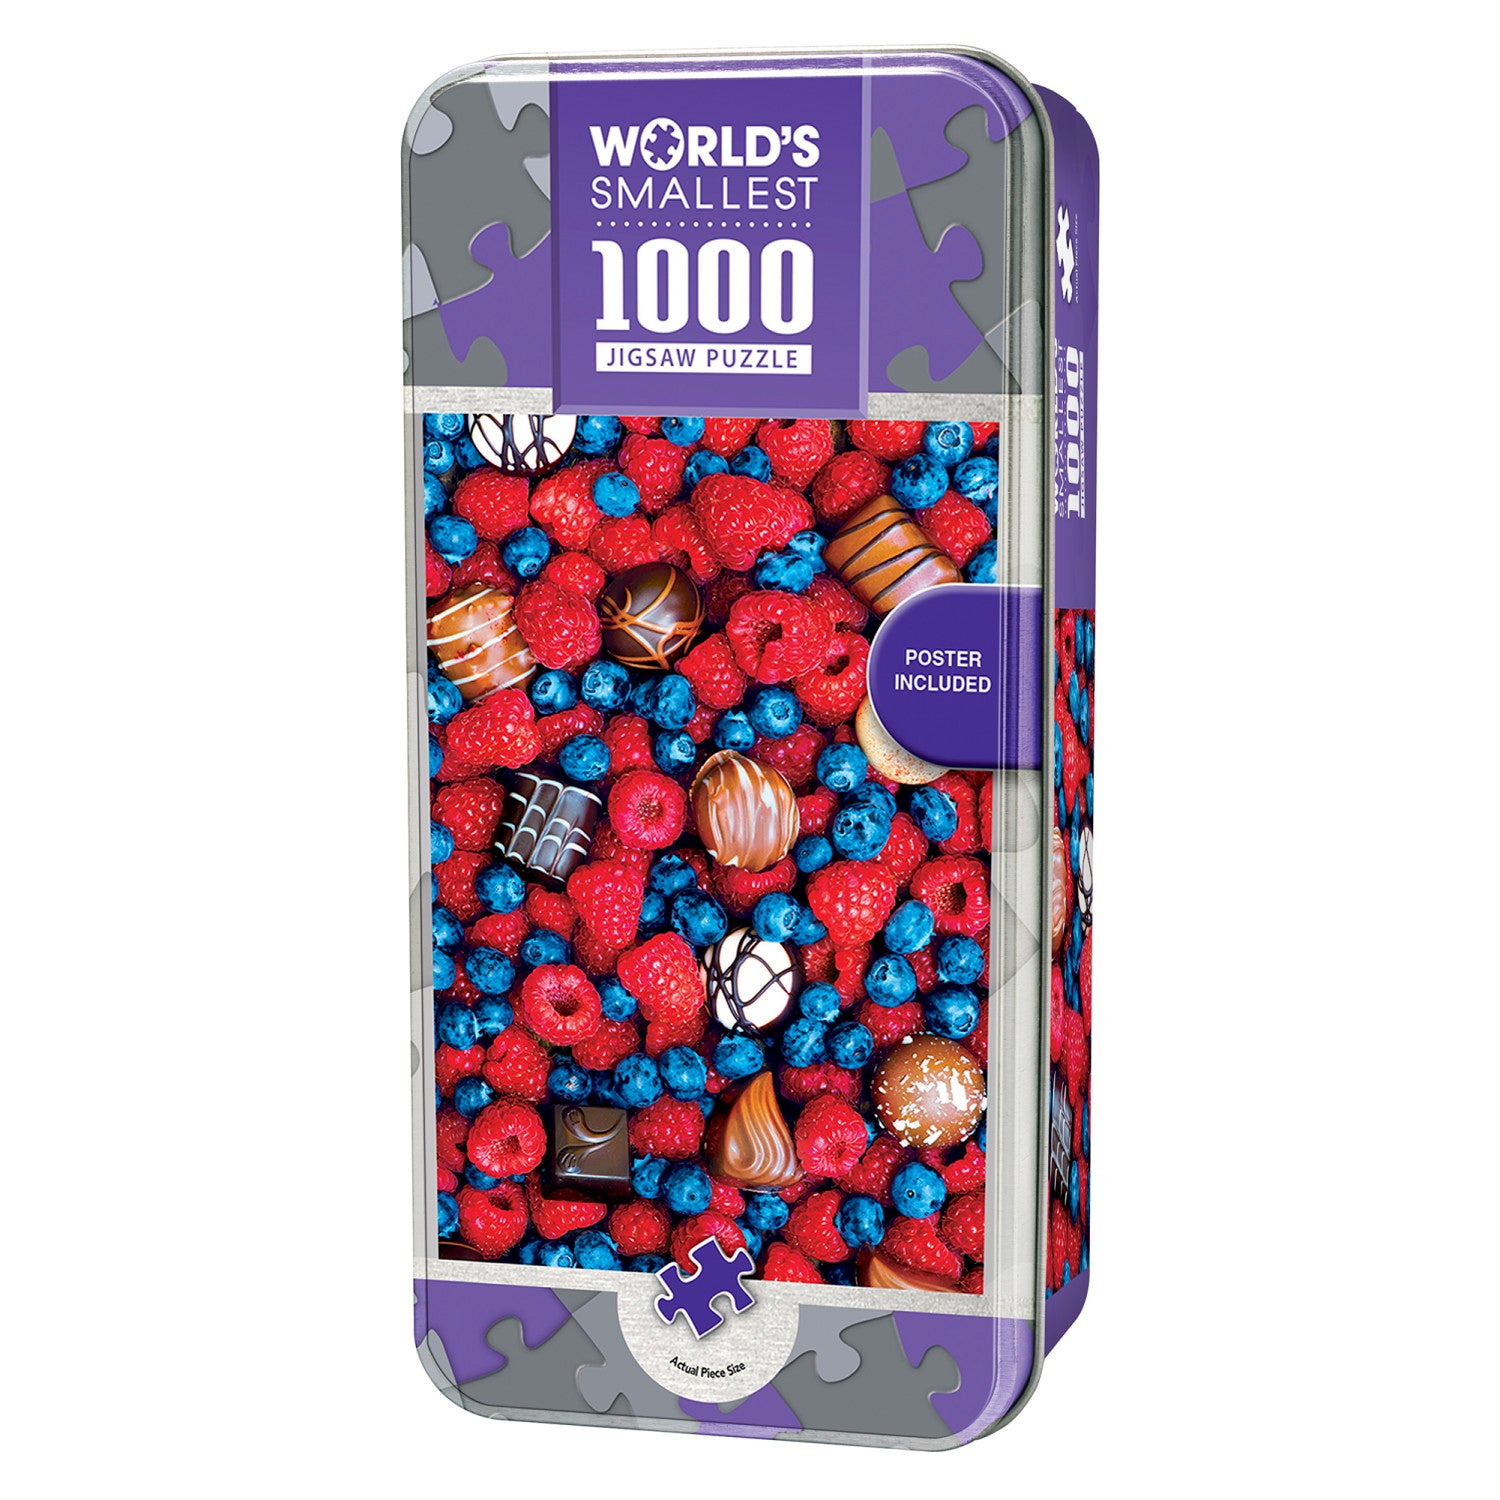 World's Smallest - Sweet Delights 1000 Piece Jigsaw Puzzle